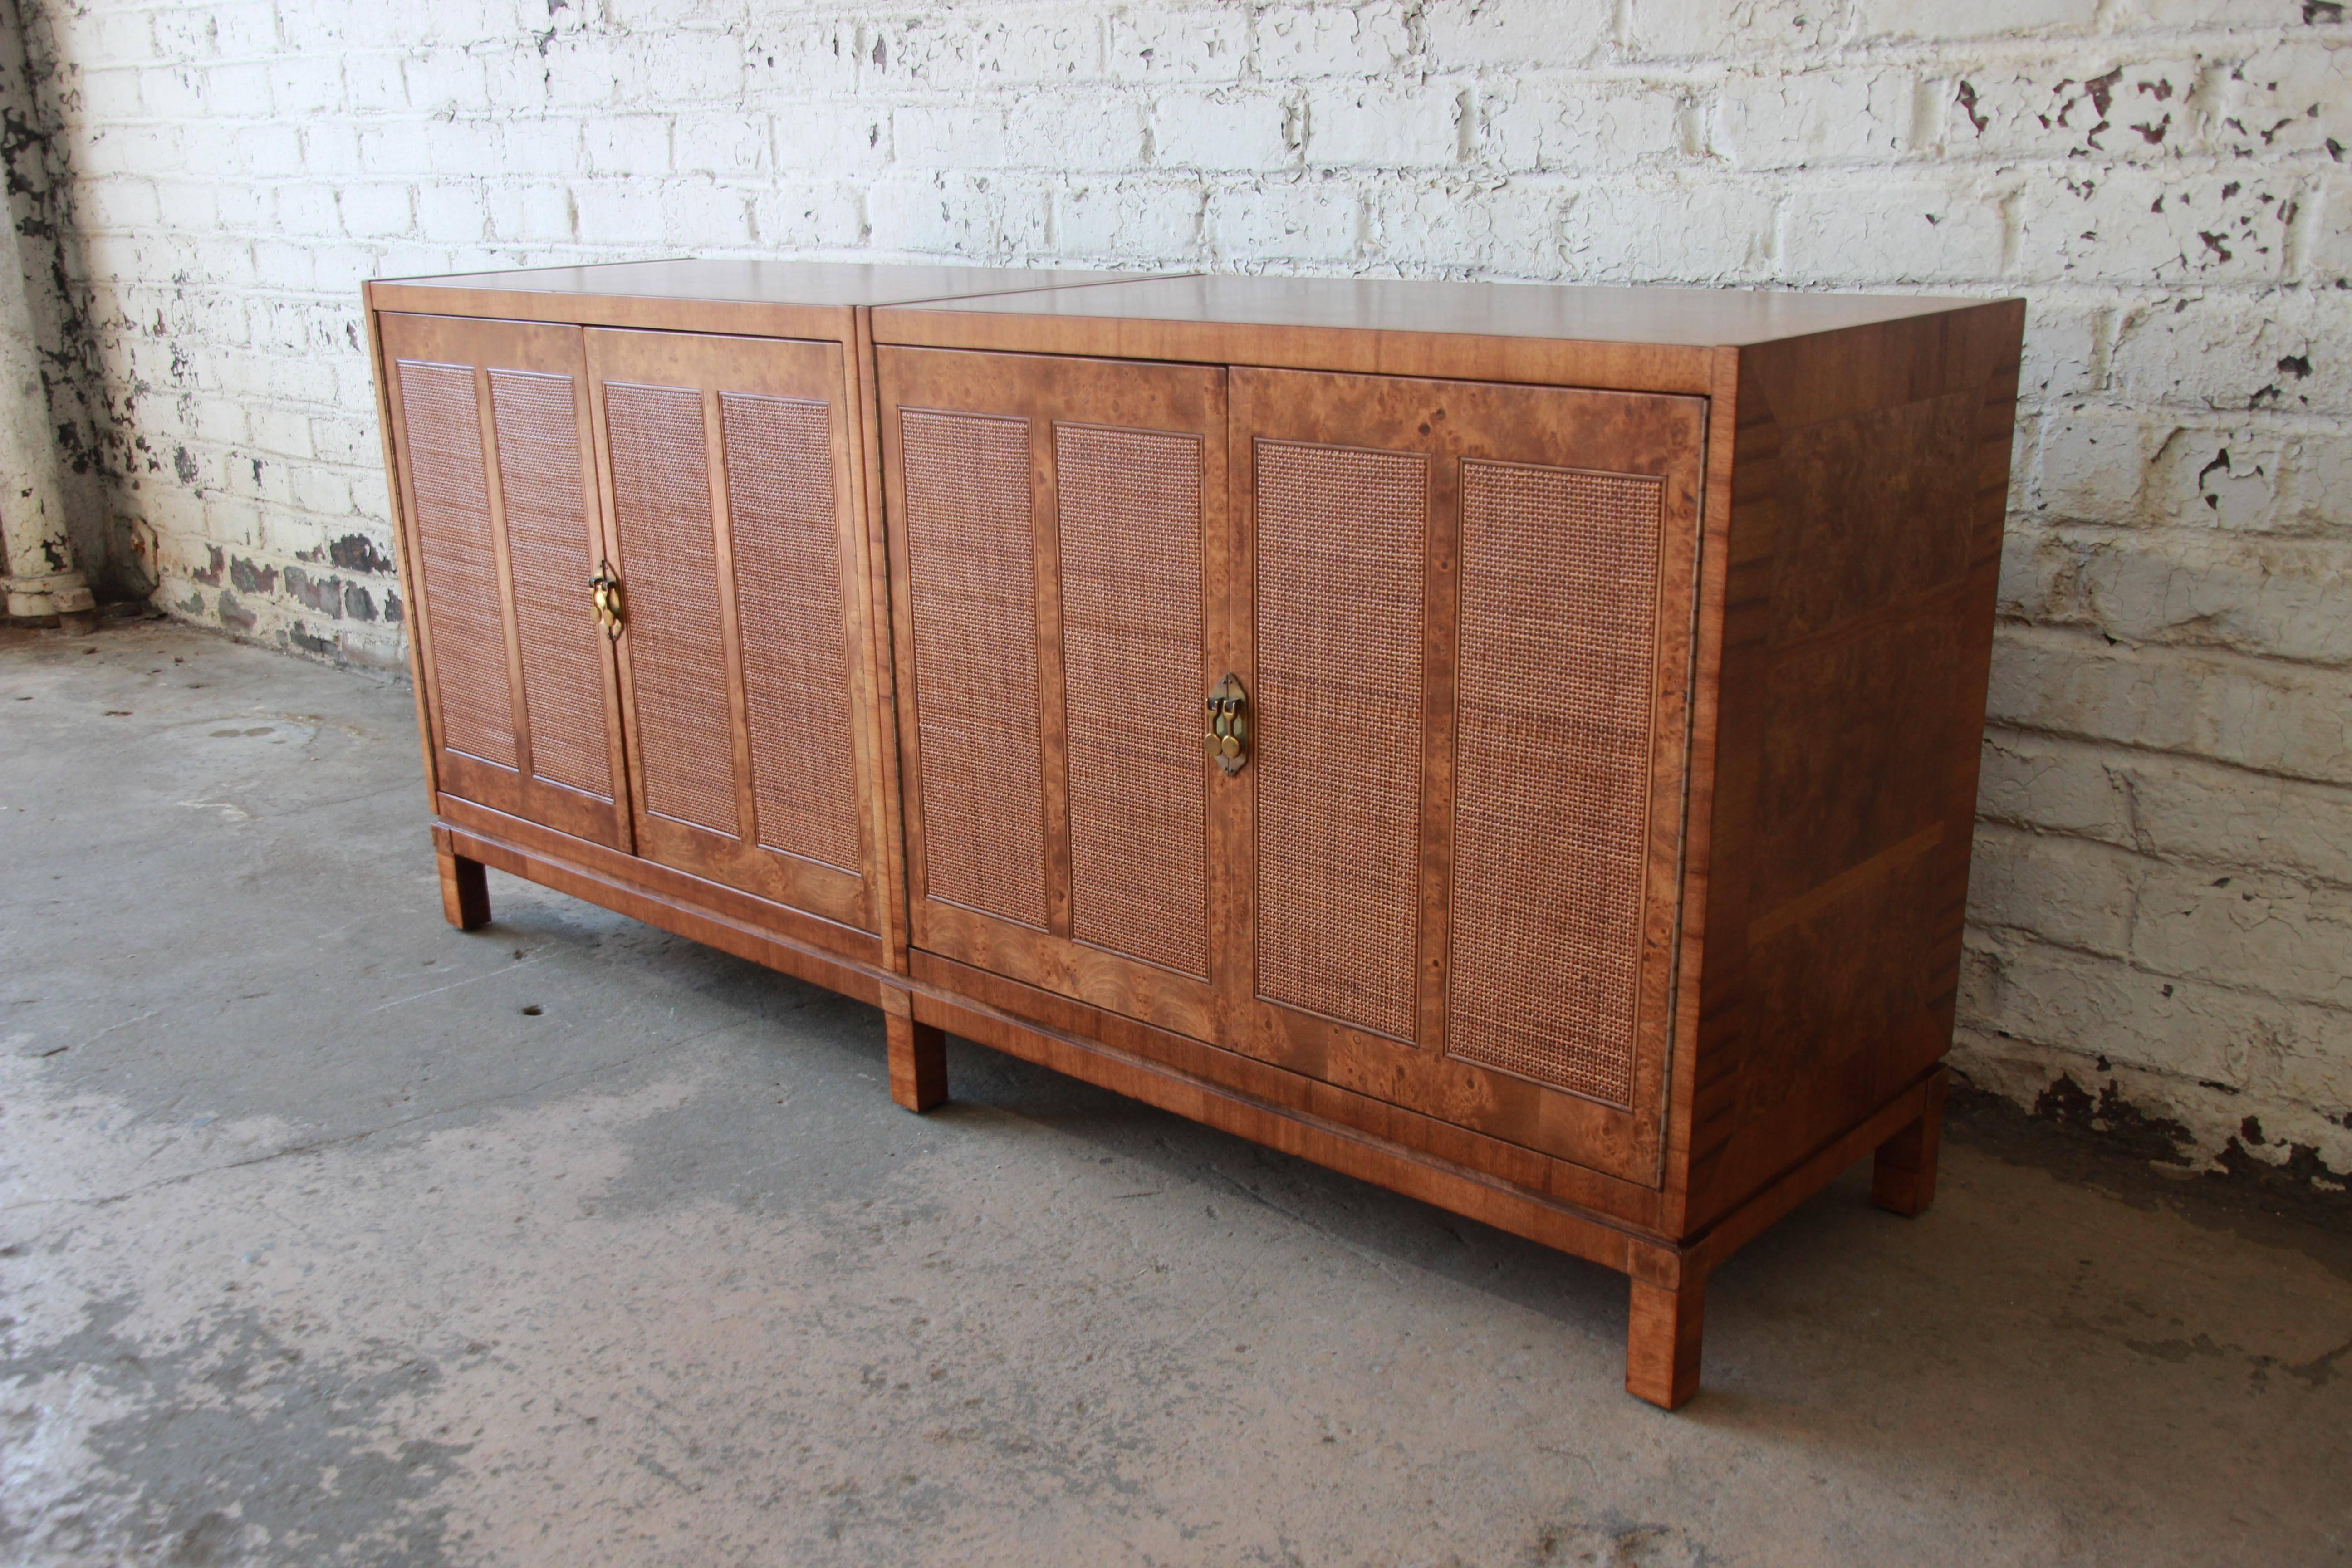 Exceptional Mid-Century Modern burled amboyna credenza or sideboard designed by Bernhard Rohne for Mastercraft. The credenza features stunning burled wood grain, sleek Mid-Century design, and woven front doors. It offers ample room for storage, with